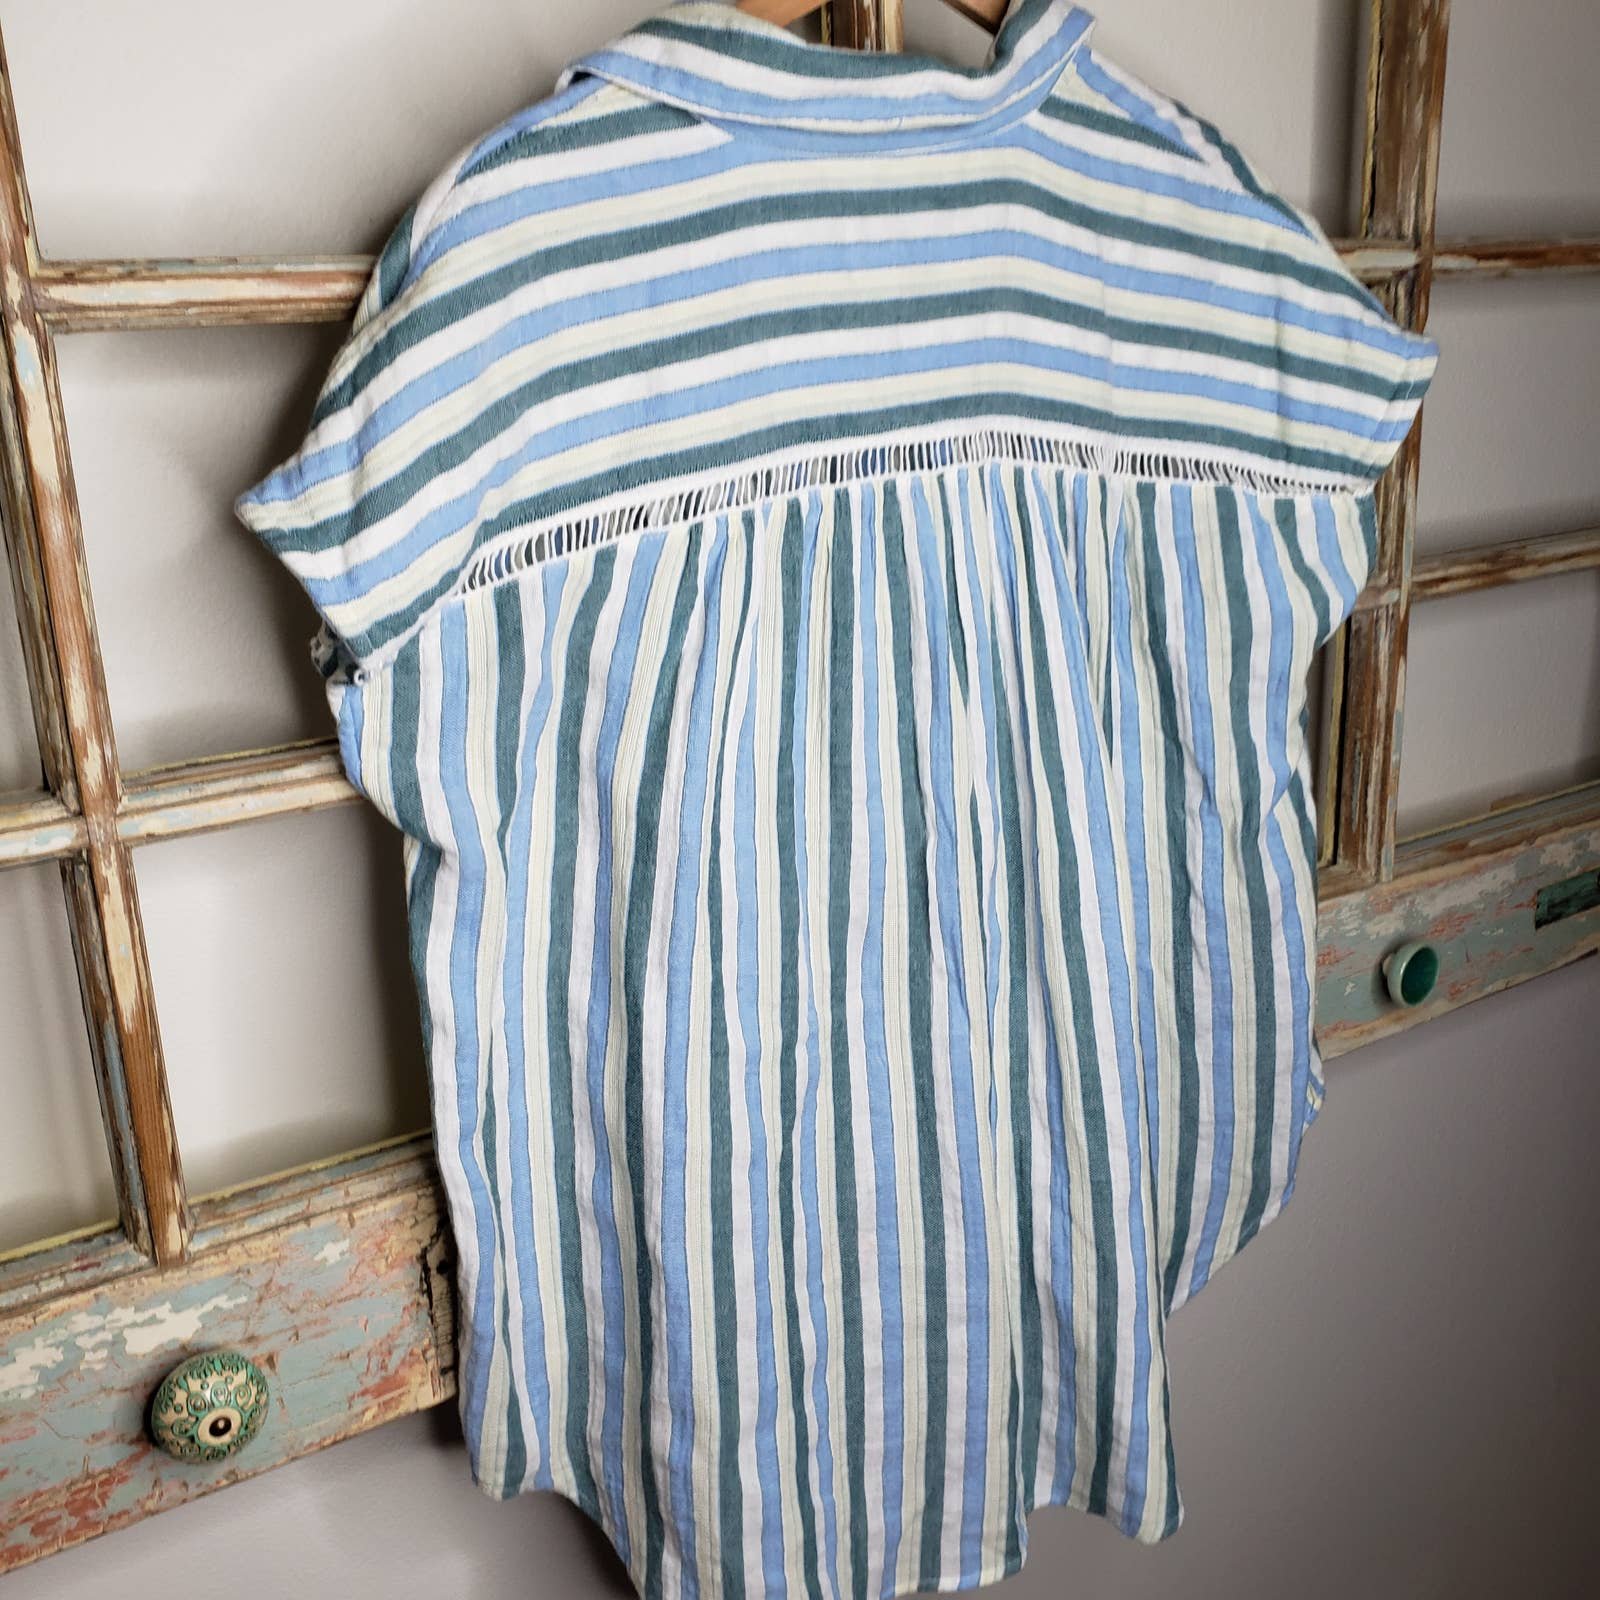 Fashion Anthropologie Cotton oversized stripped high/low shirt ladies size small H6E5kpVM8 Online Exclusive